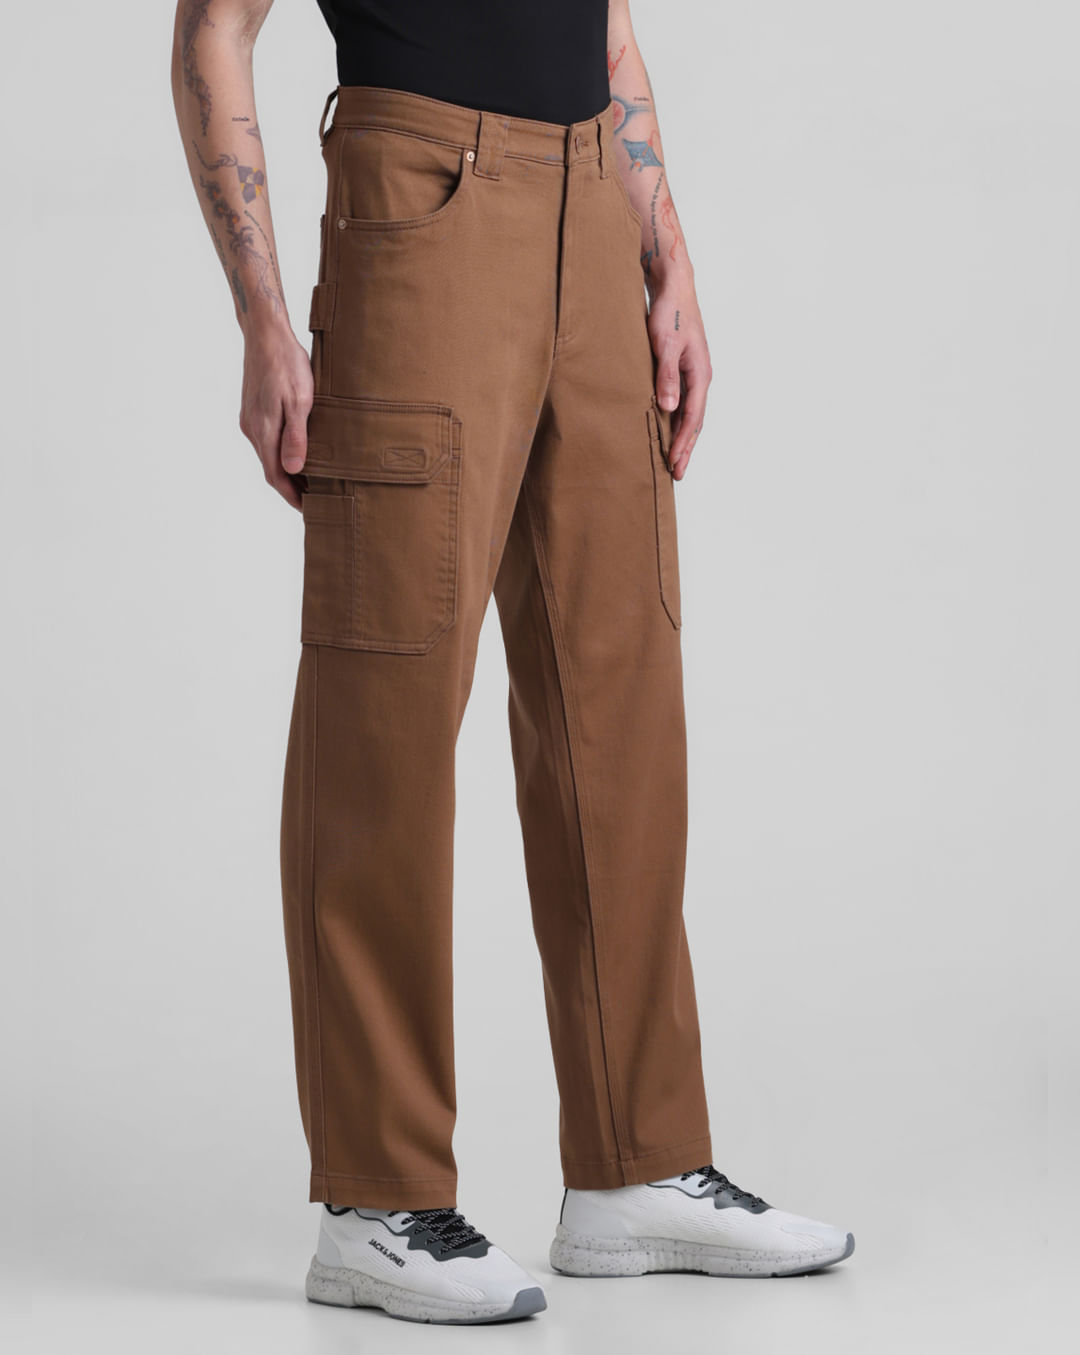 Dickies Women's Relaxed Fit Mid-Rise Stretch Cargo Pants